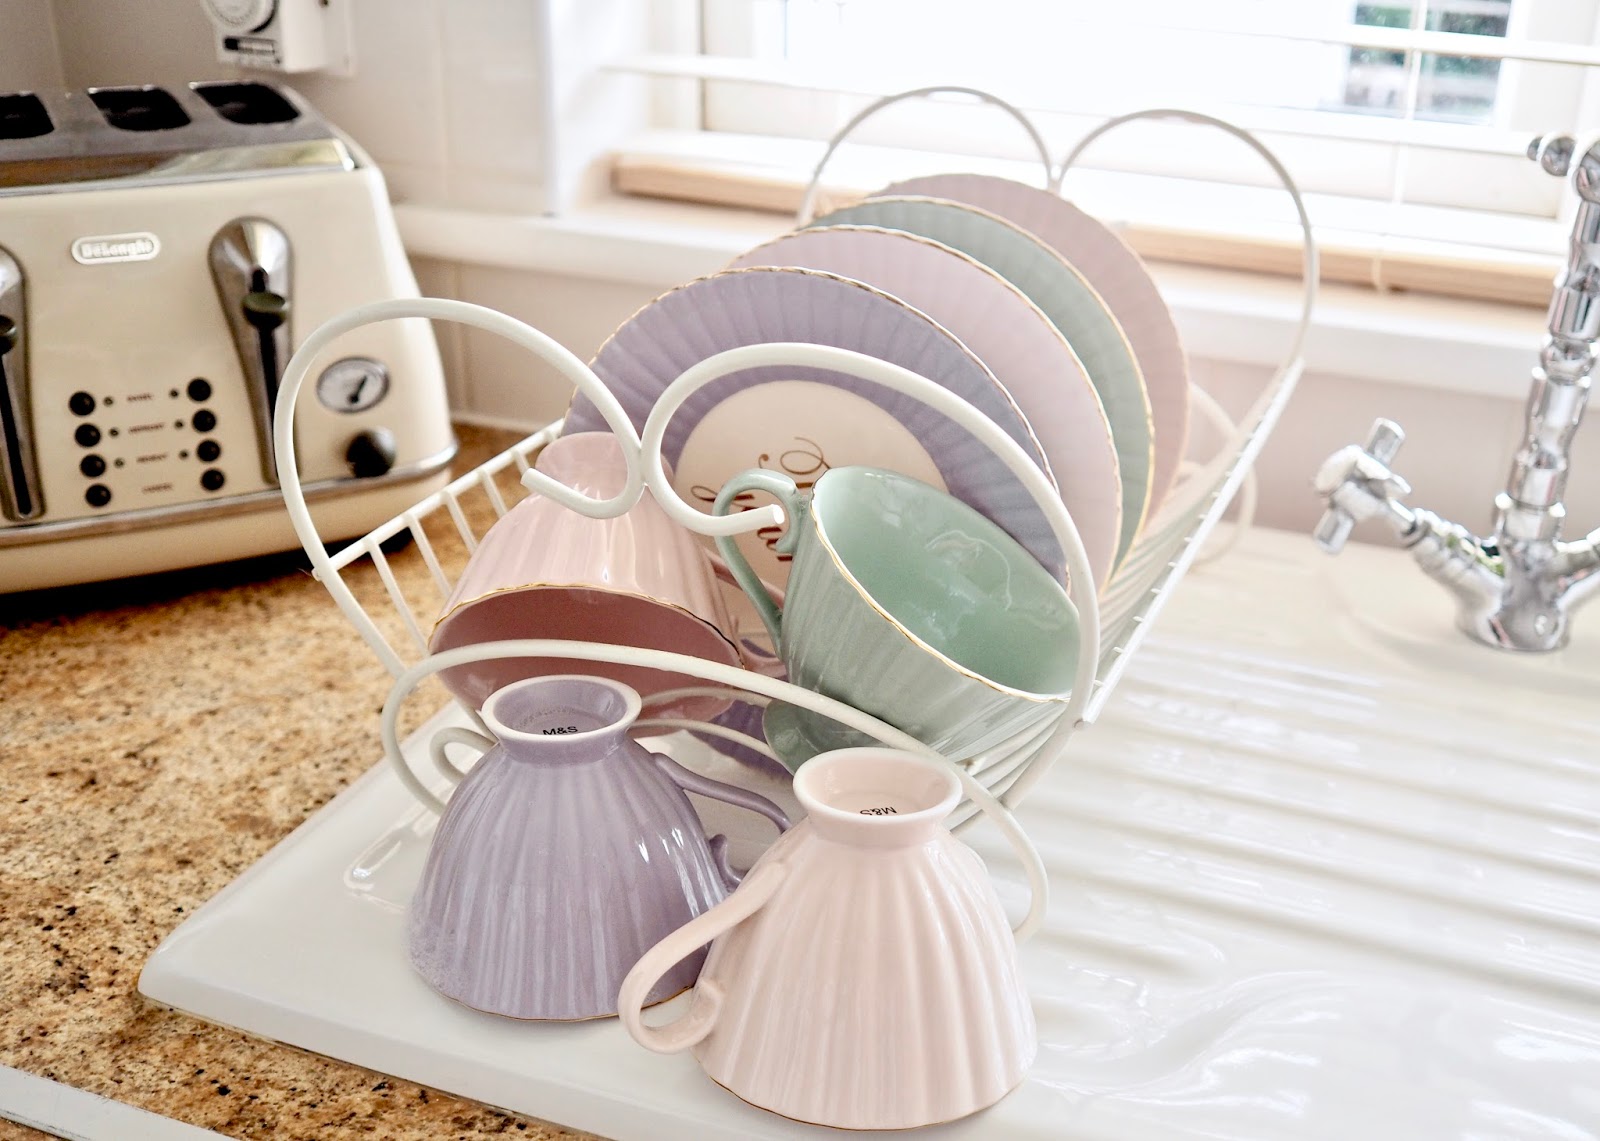 Video | Tips for buying teacups and China